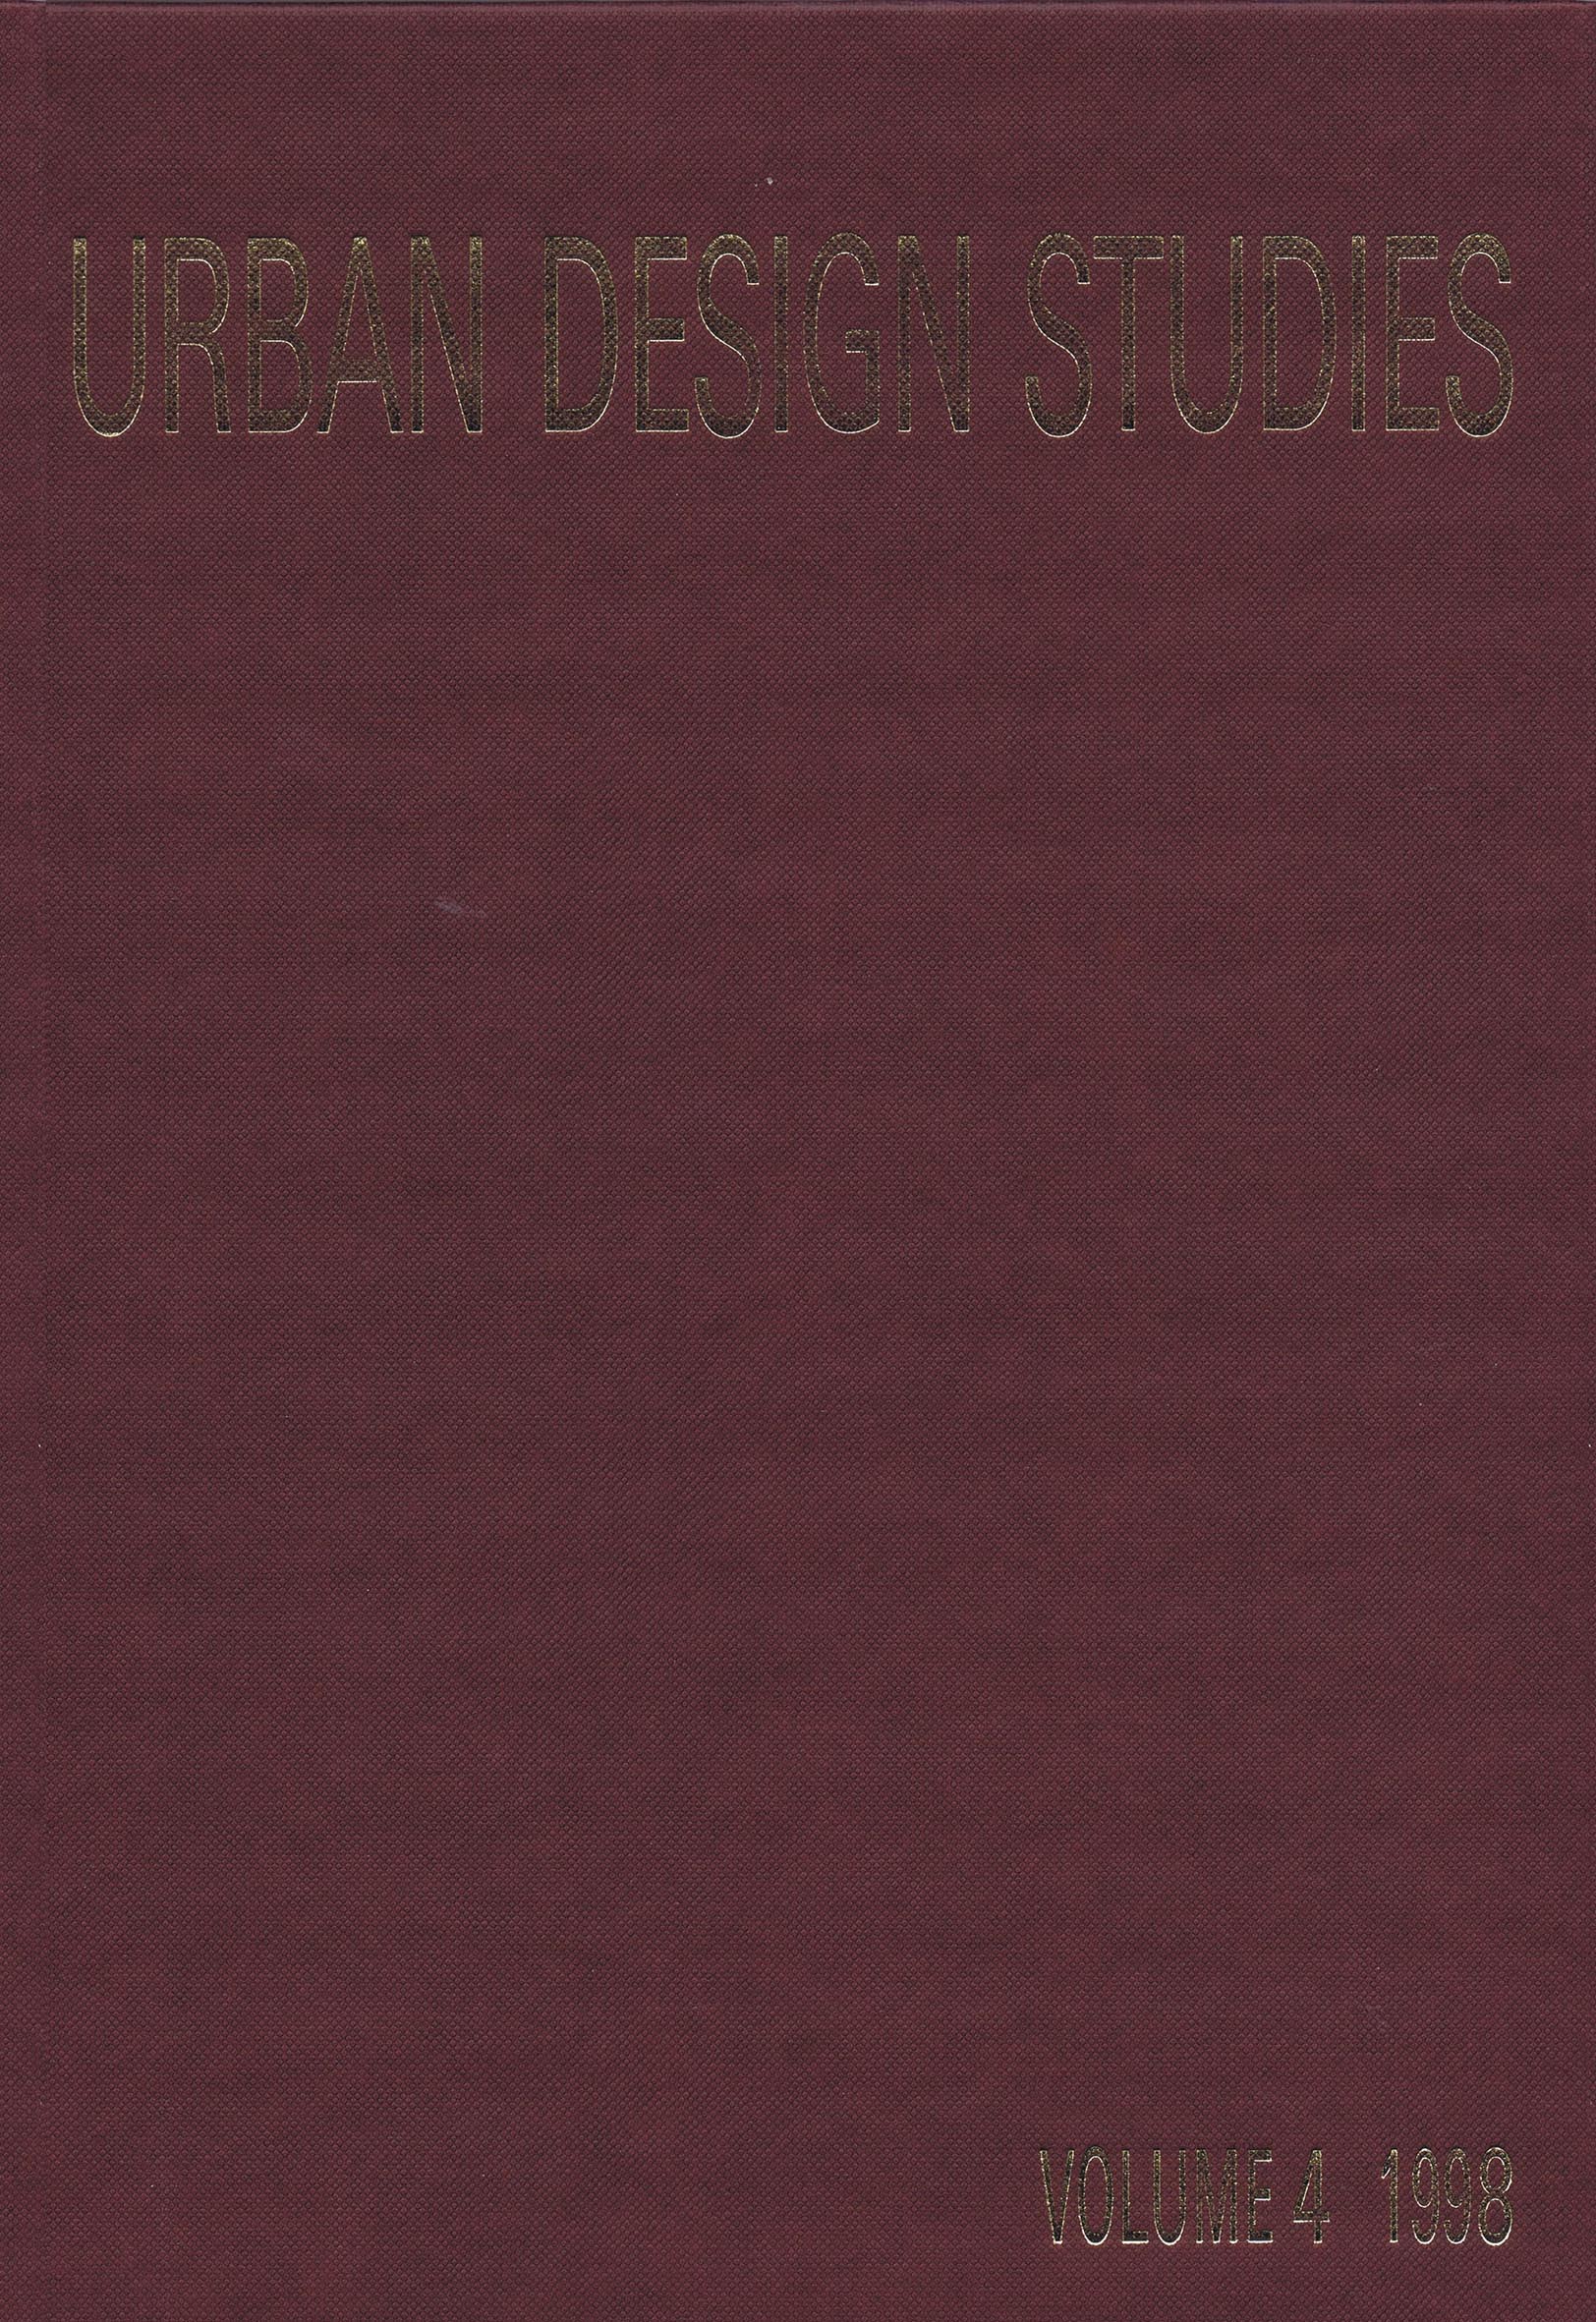 UDS_4_front_cover